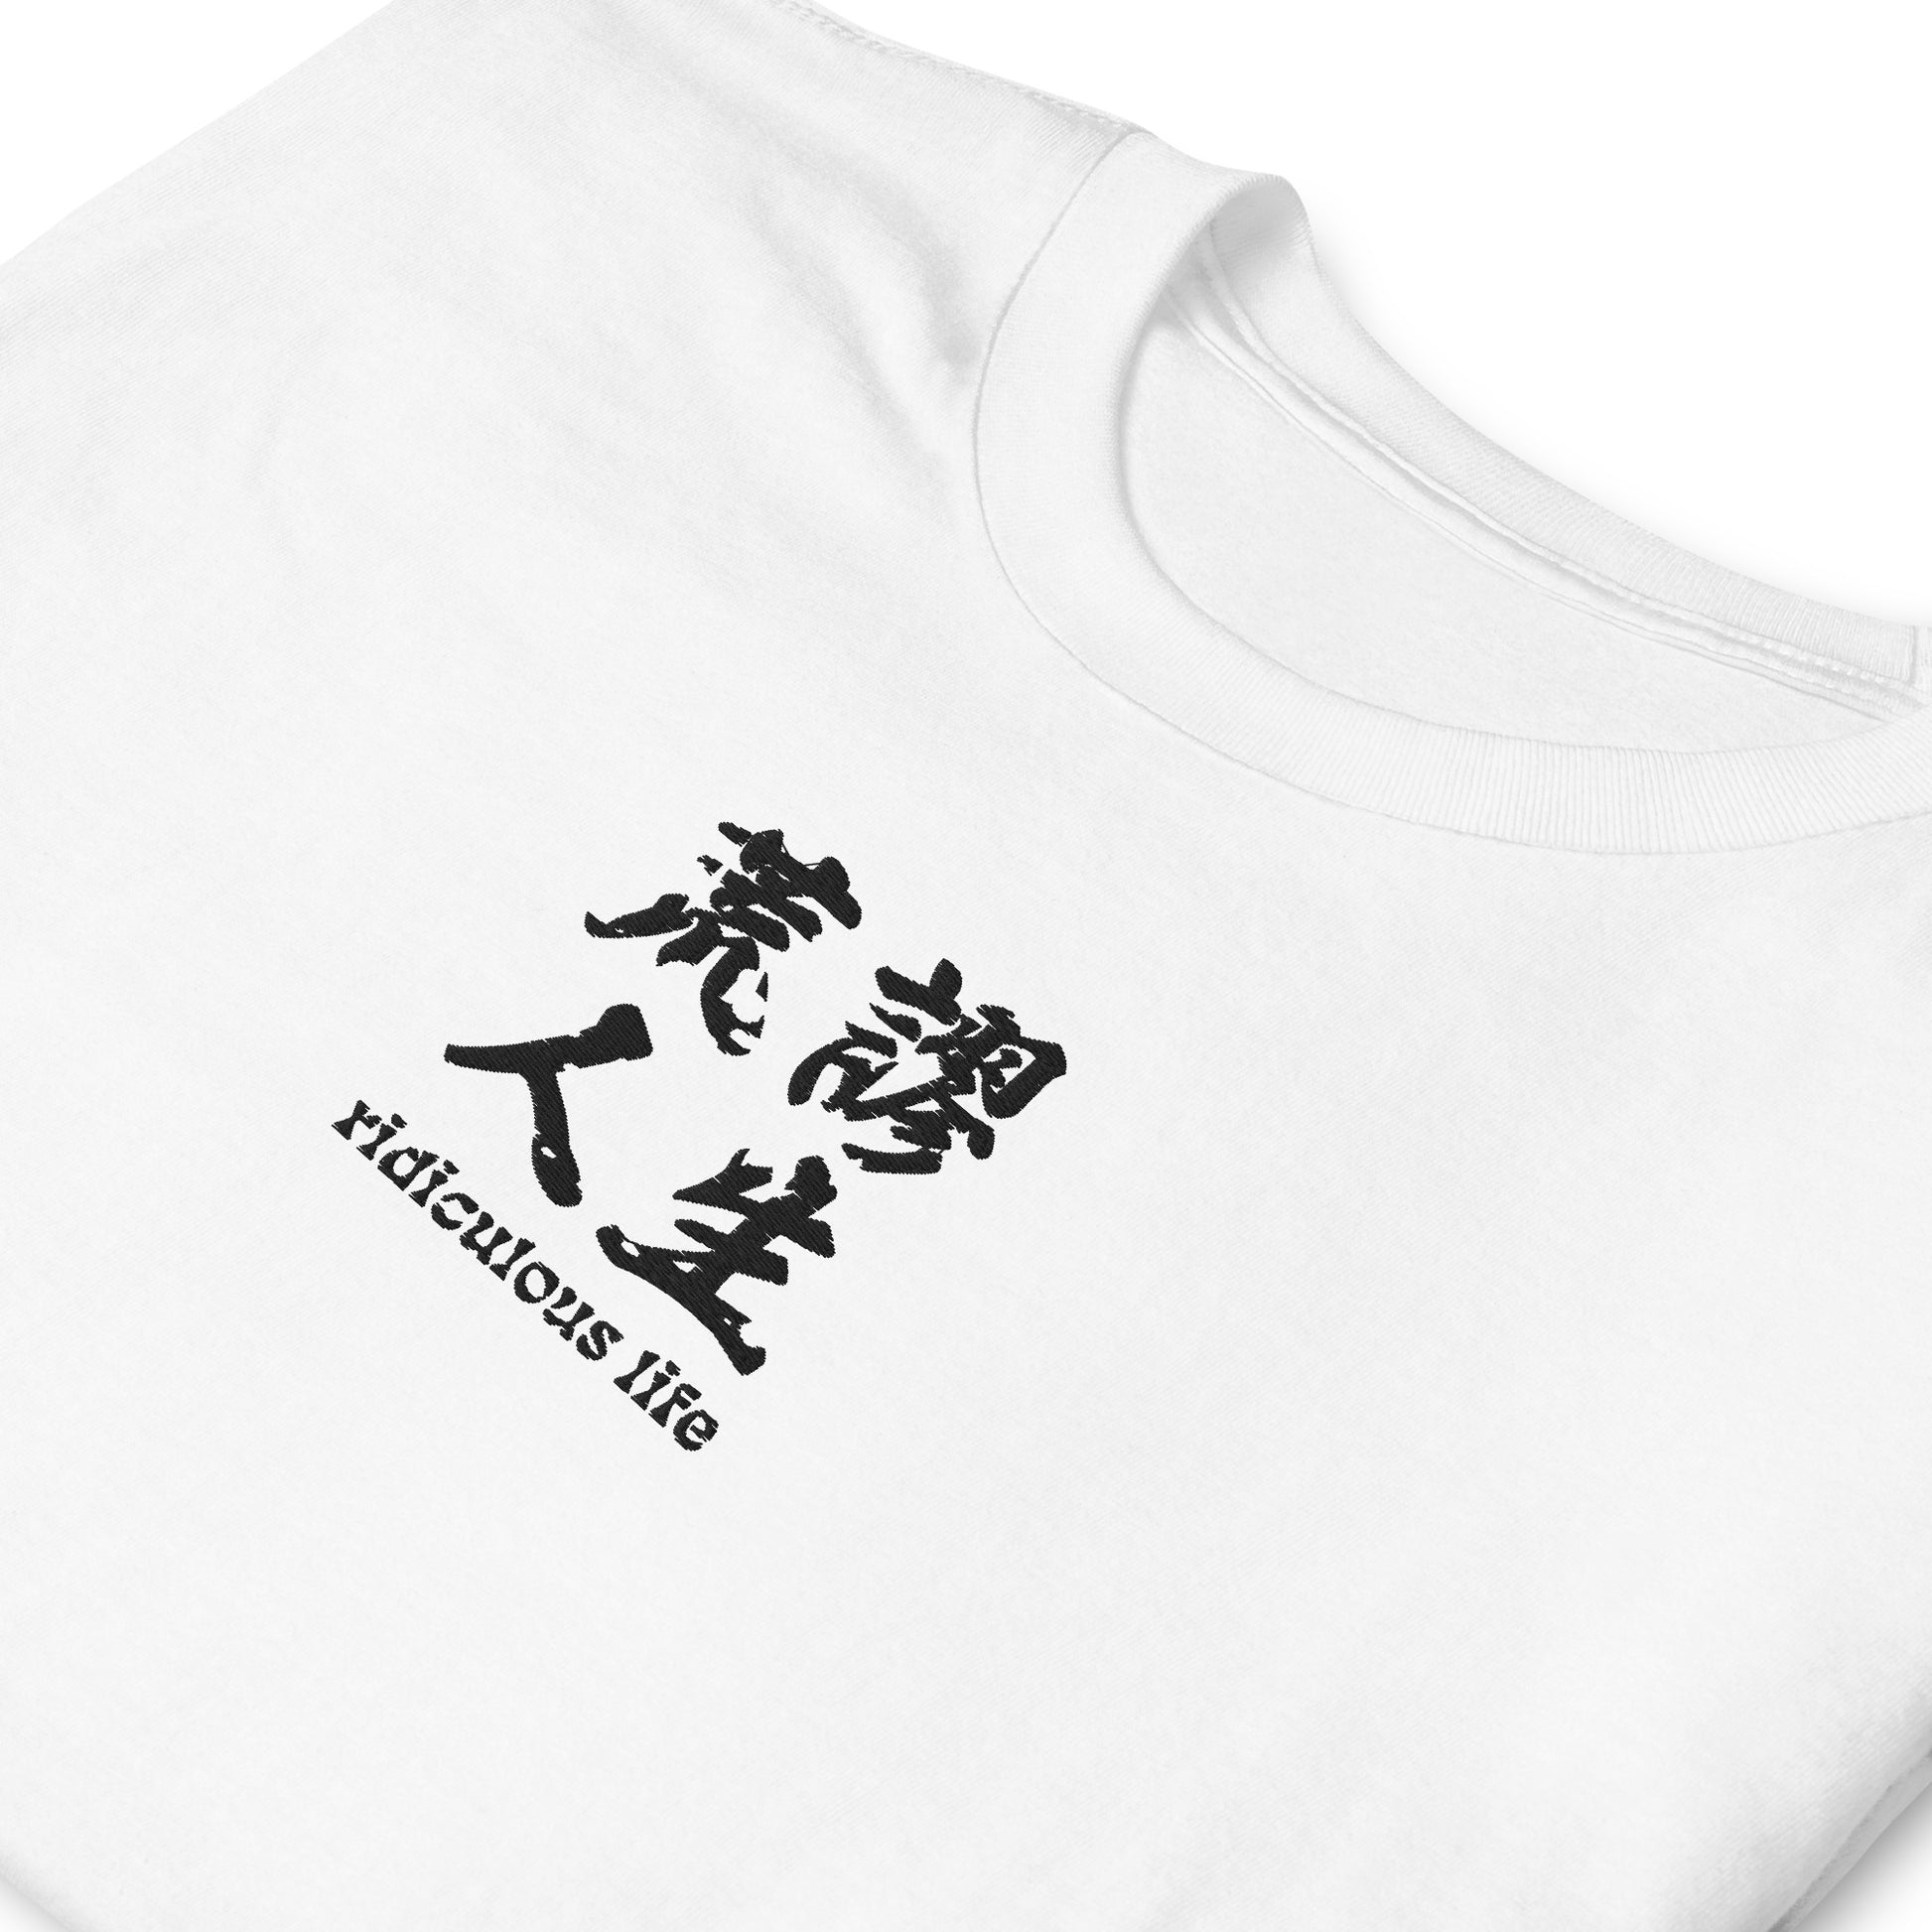 White High Quality Tee - Front Design with an Black Embroidery "Ridiculous Life" in Chinese and English